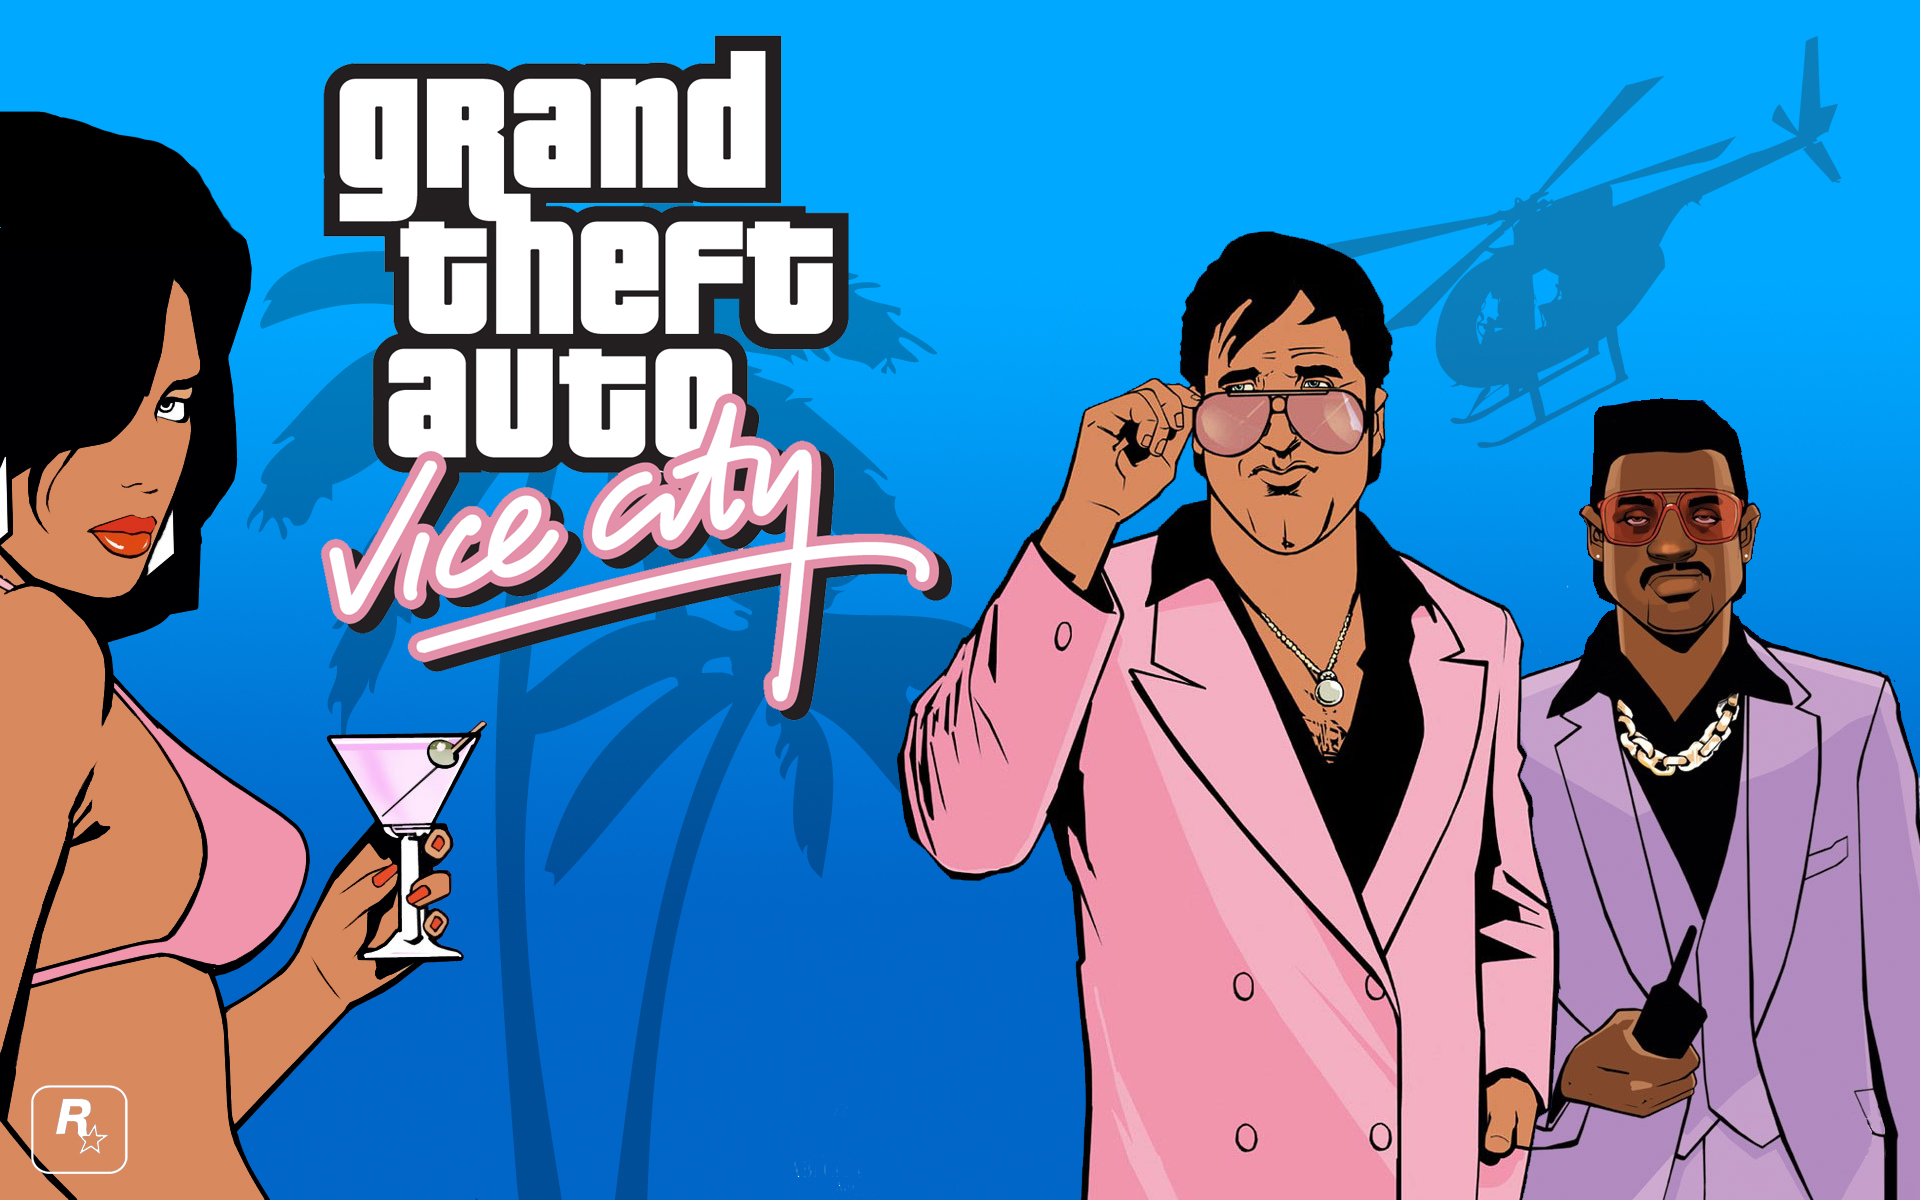 Bewusteloos Hedendaags tevredenheid Grand Theft Auto: Vice City (Mobile) Video Game Review | N For Nerds